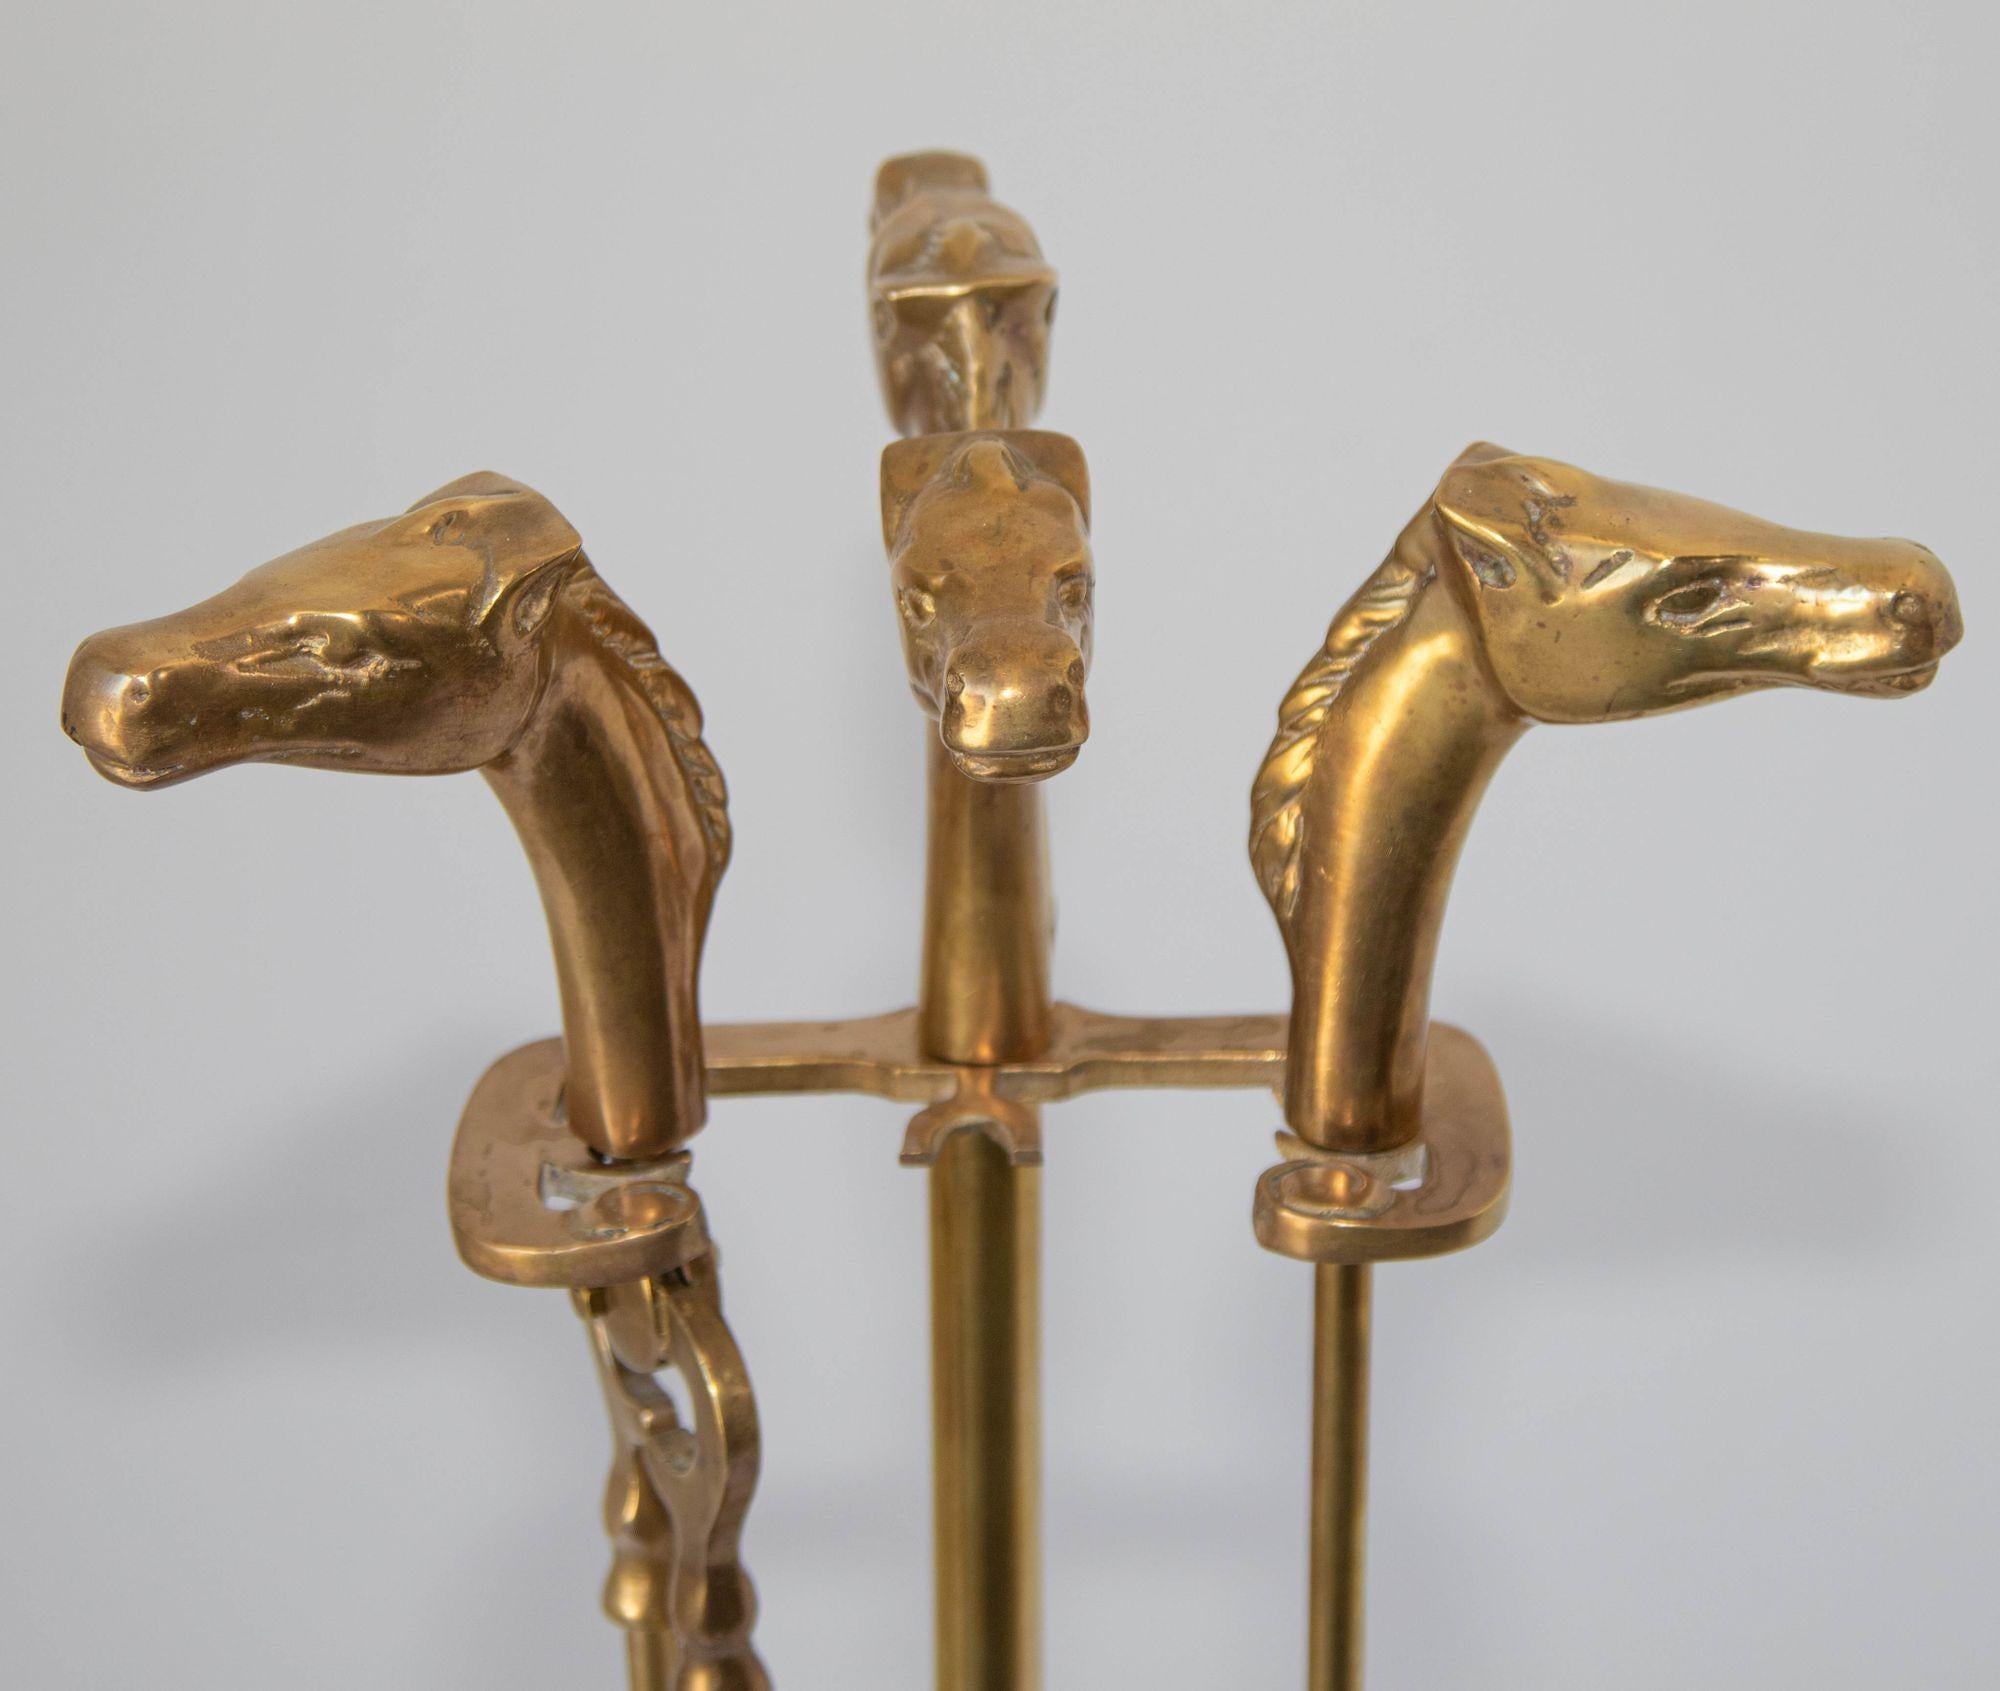 Vintage French Brass Fireplace Tools Vintage Set of 1950s with Horse Head Motif.
Elegant and beautiful set of four pieces solid brass French fire tools on stand with equestrian horse bust finials resting on rectangular decorative cast brass base.